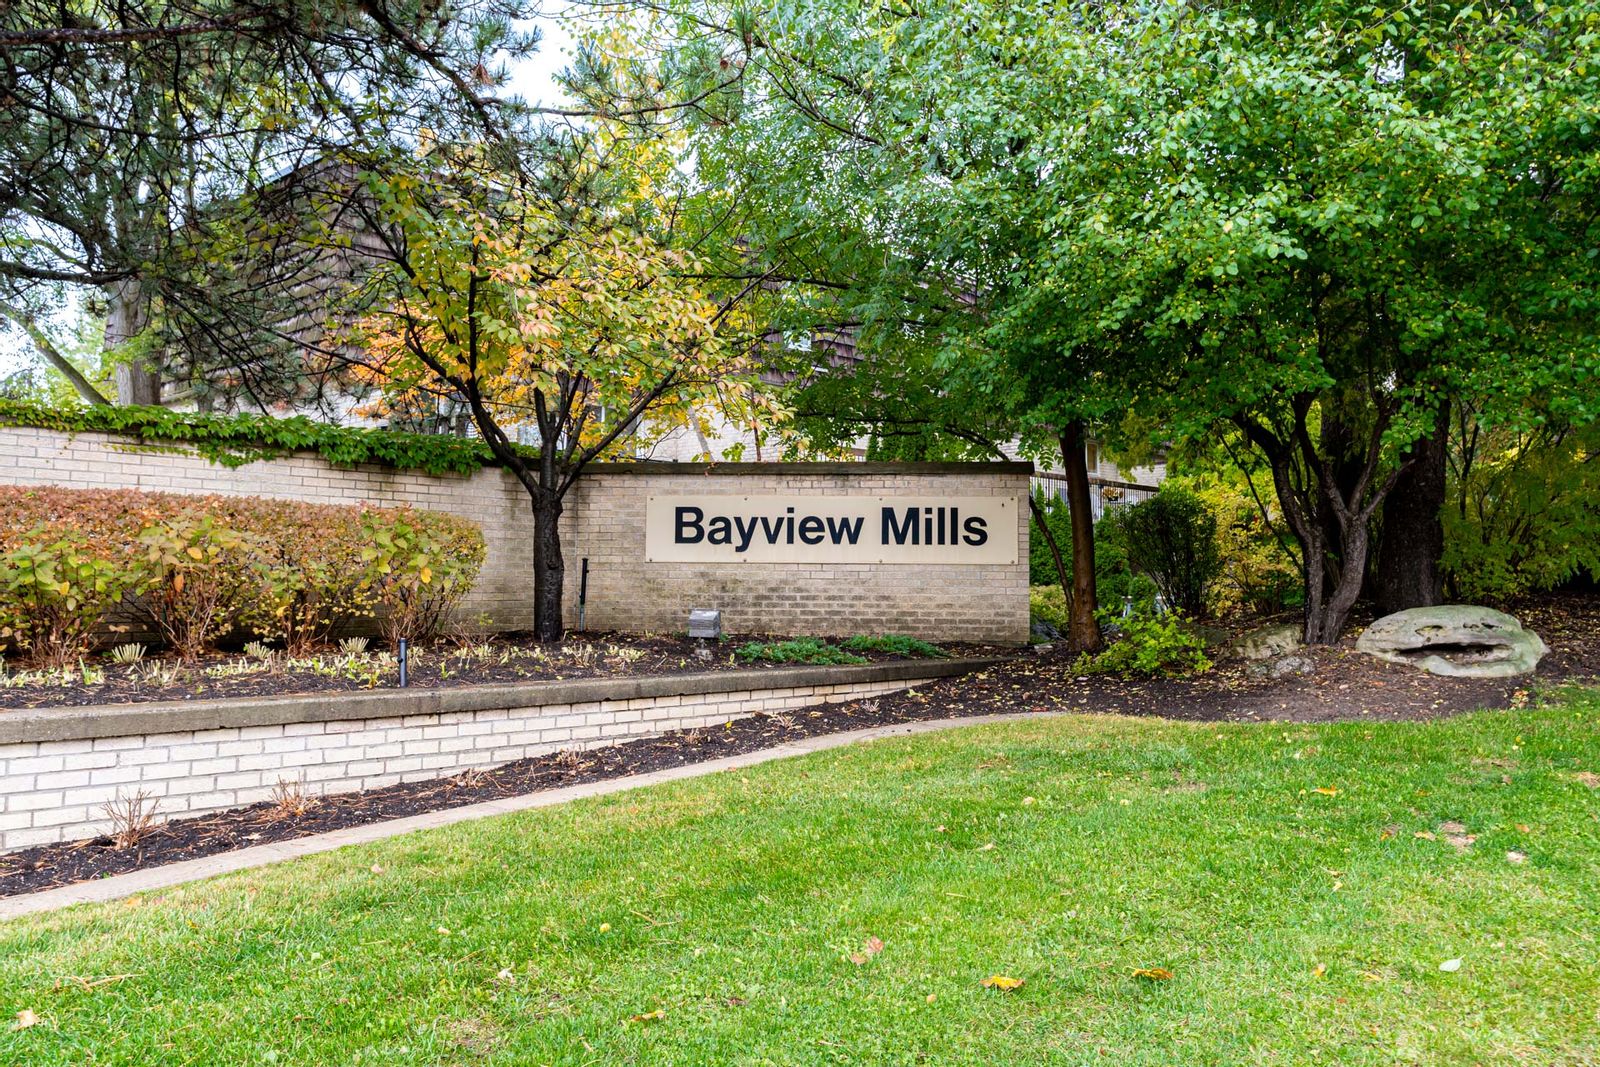 What is Bayview Mills?